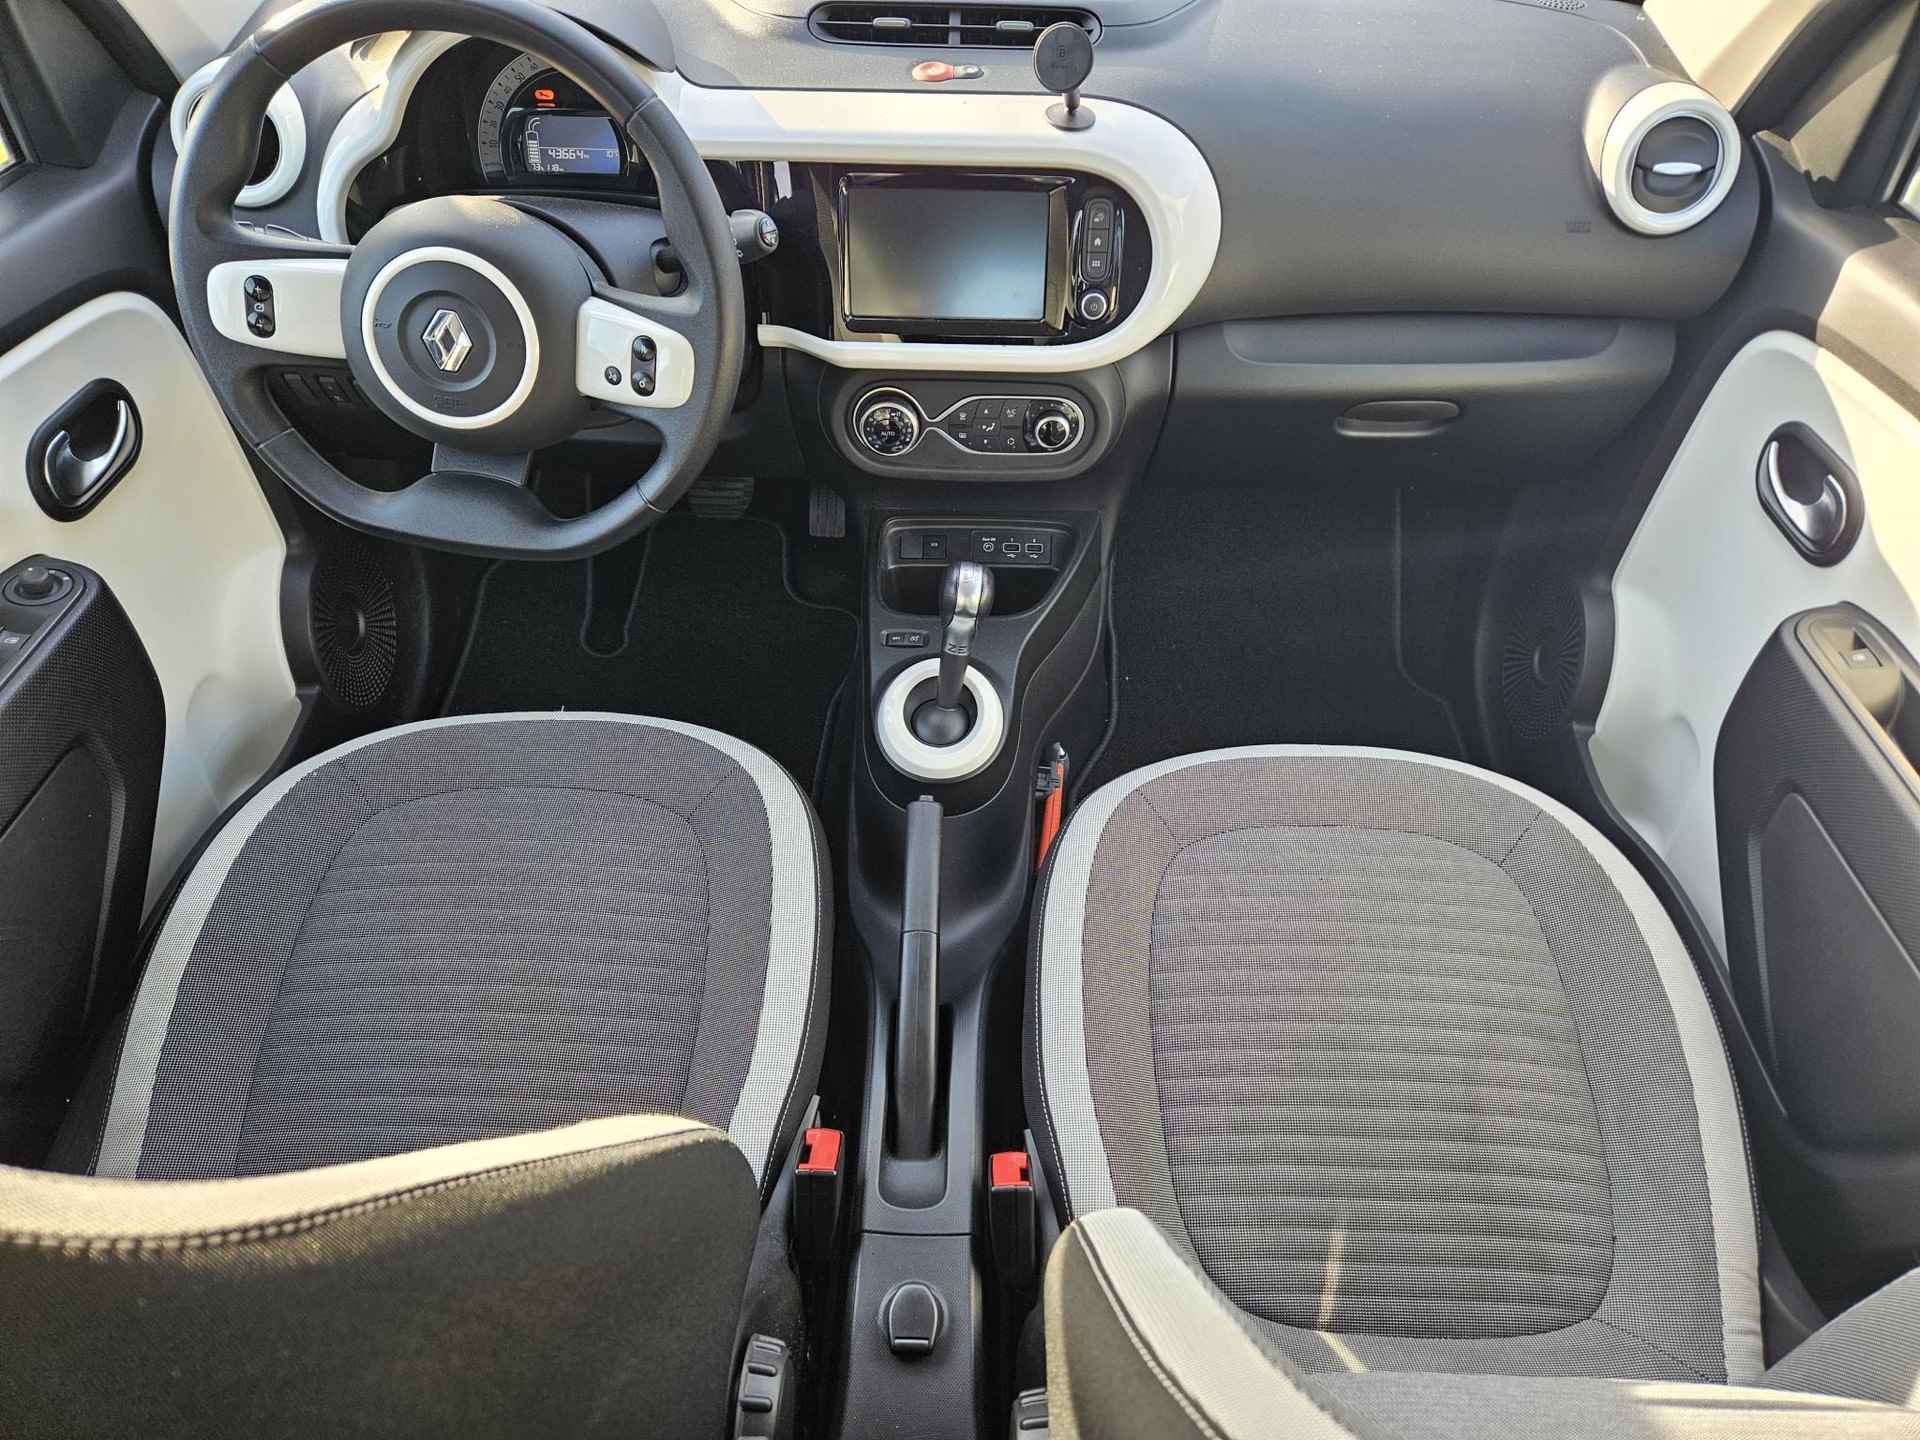 Renault Twingo Z.E. R80 Collection / SUBSIDIE  € 2000,- mogelijk / AUTOMAAT / Navigatiesysteem / Airco / Apple Car Play & Android Auto / DAB / Led dagrijverlichting / Metaalkleur / Cruise control - 2/47